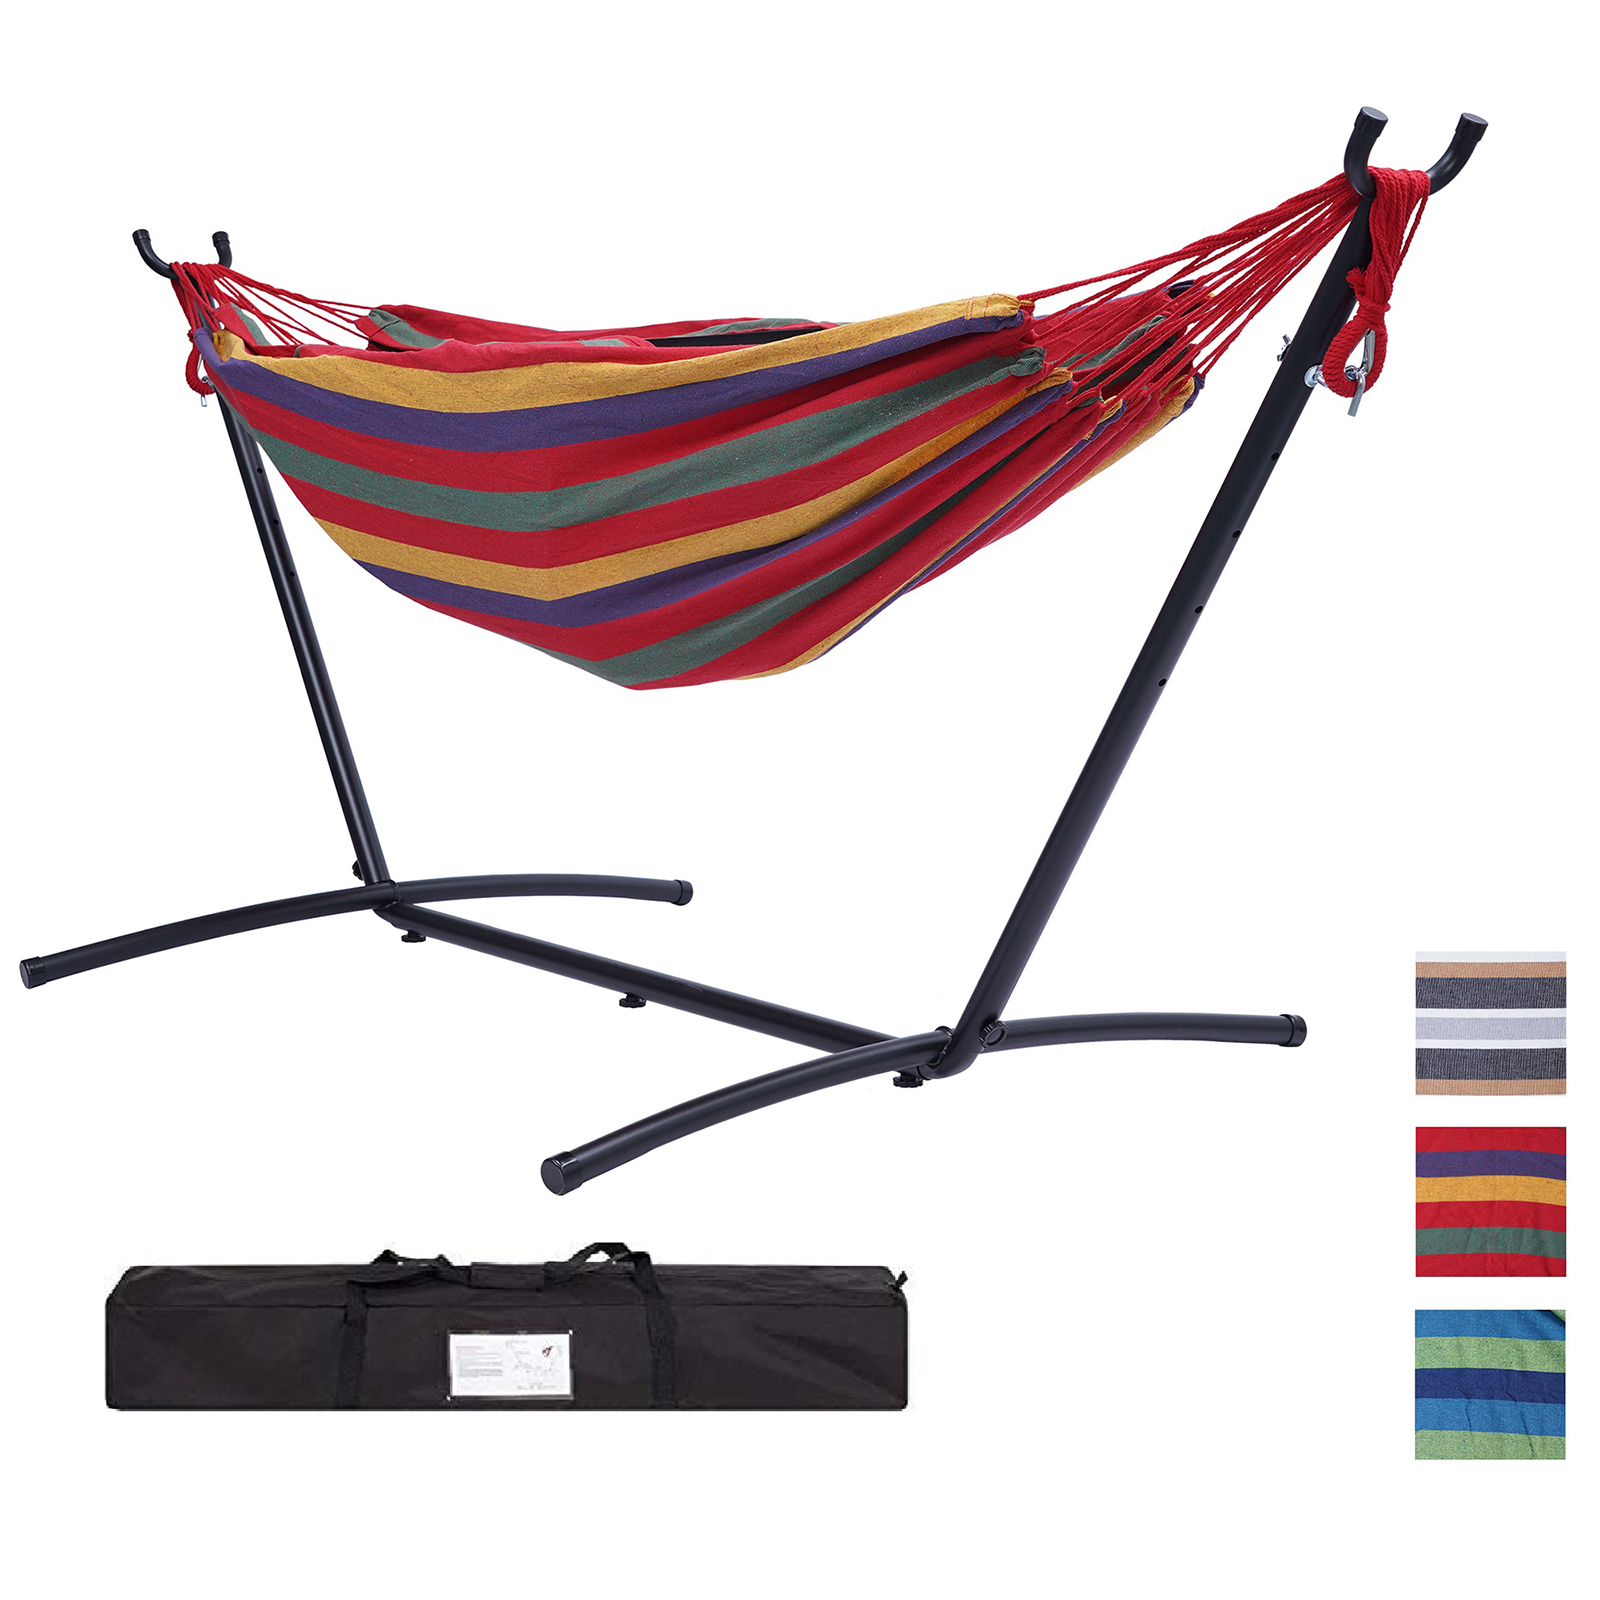 Double Hammock with Steel Stand 2 Person Cotton Hammocks for Outdoors Indoors, 450lb Weight Capacity - image 1 of 1